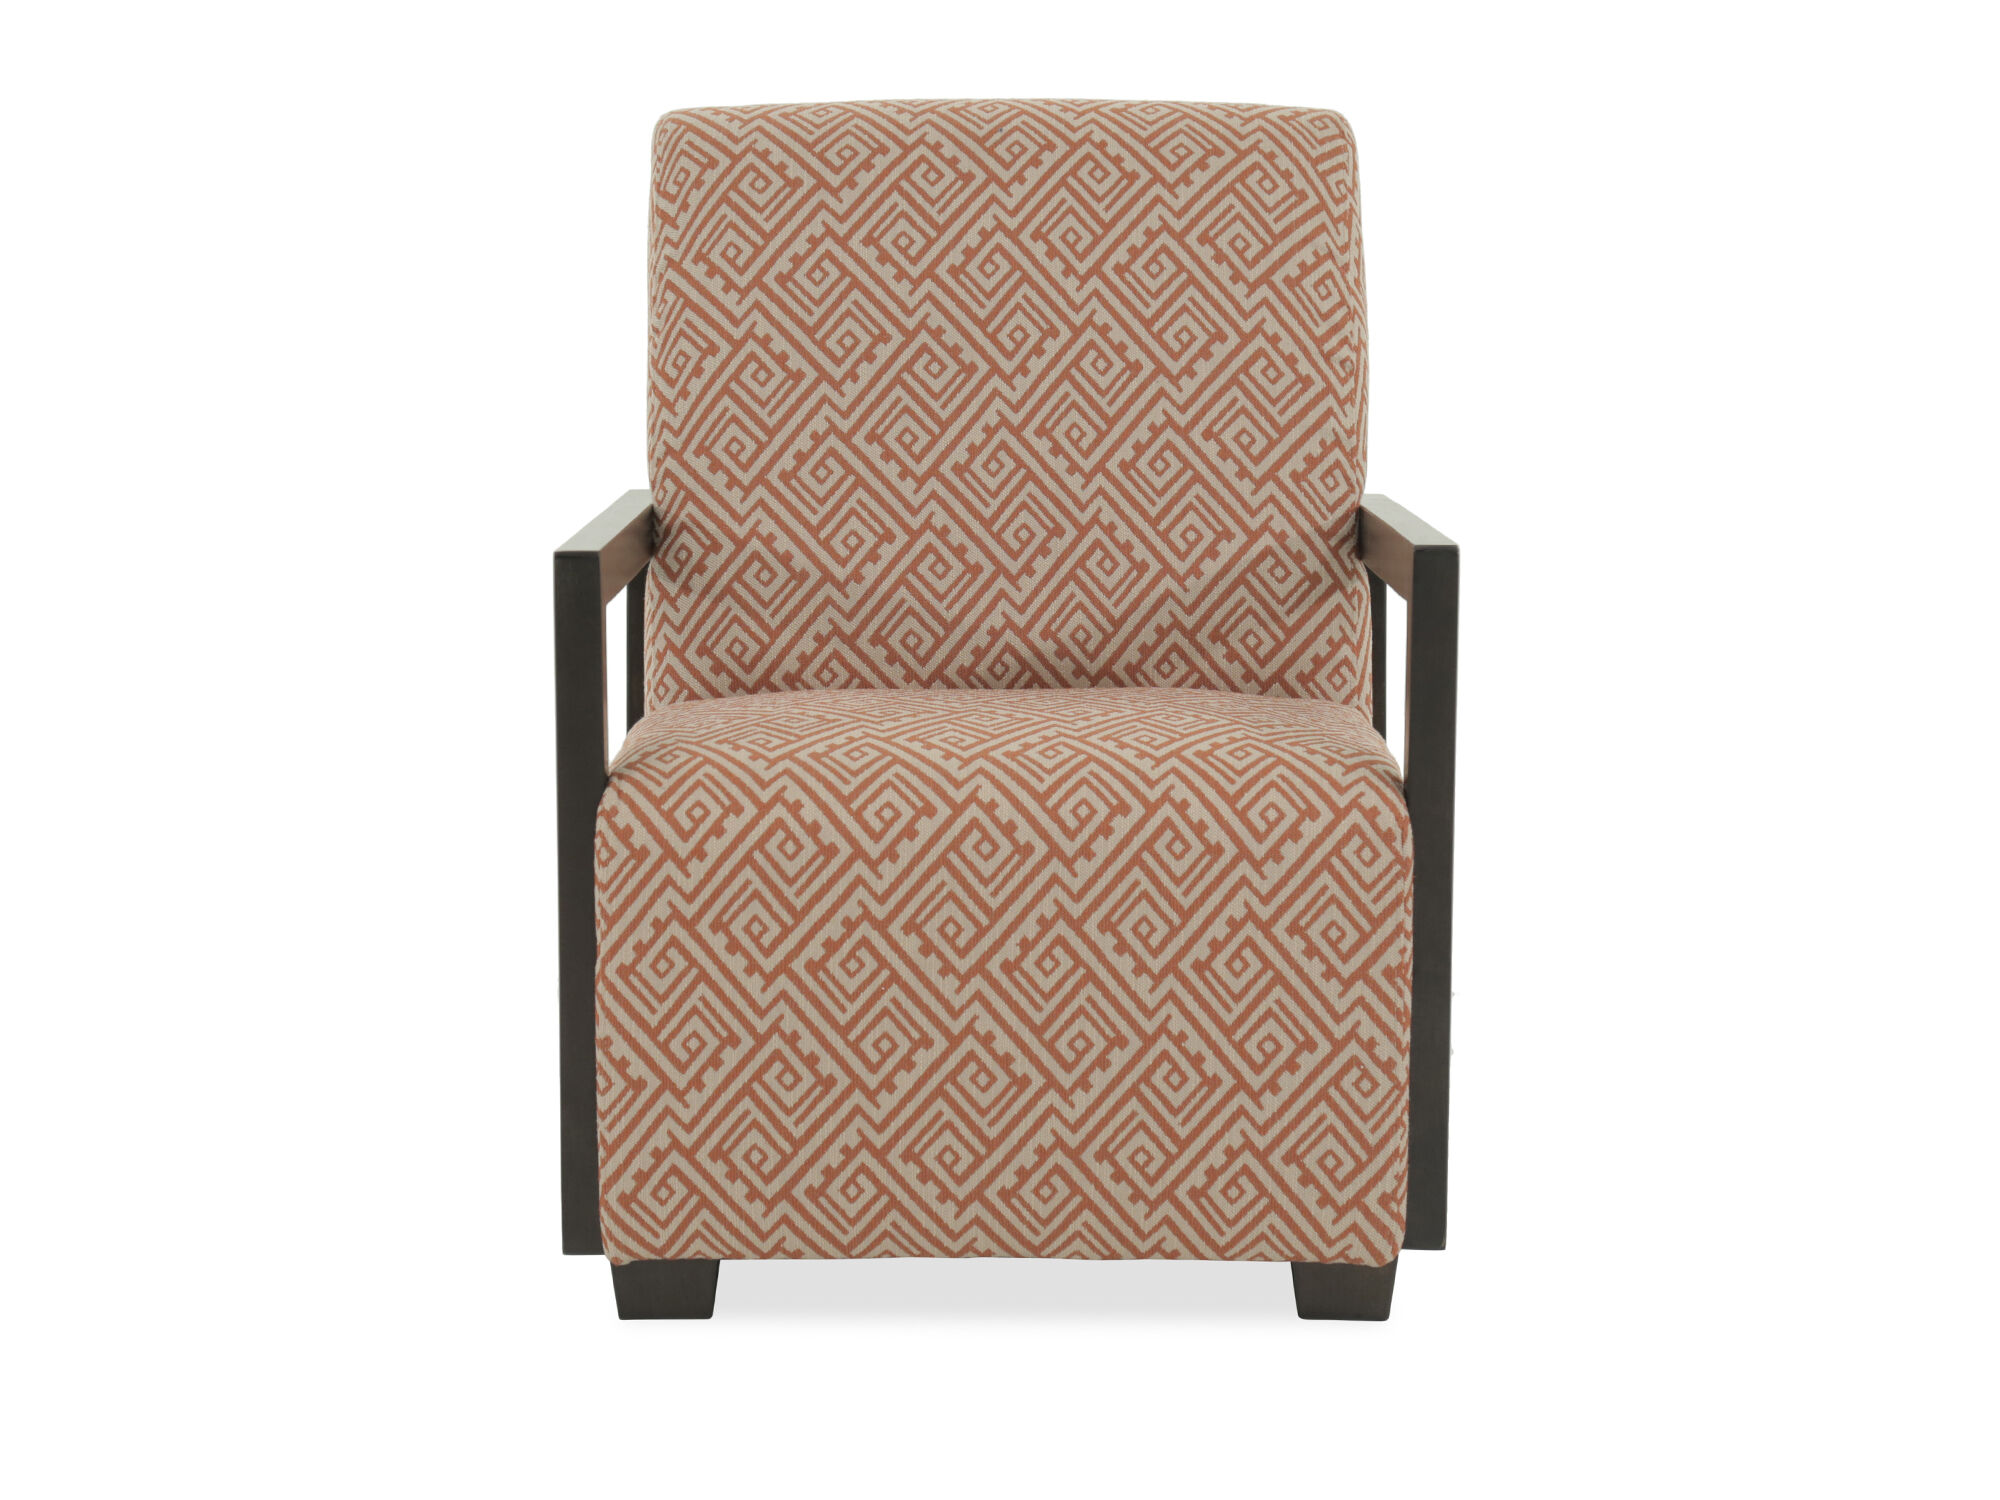 Geometric Patterned Contemporary Accent Chair | Mathis Brothers Furniture